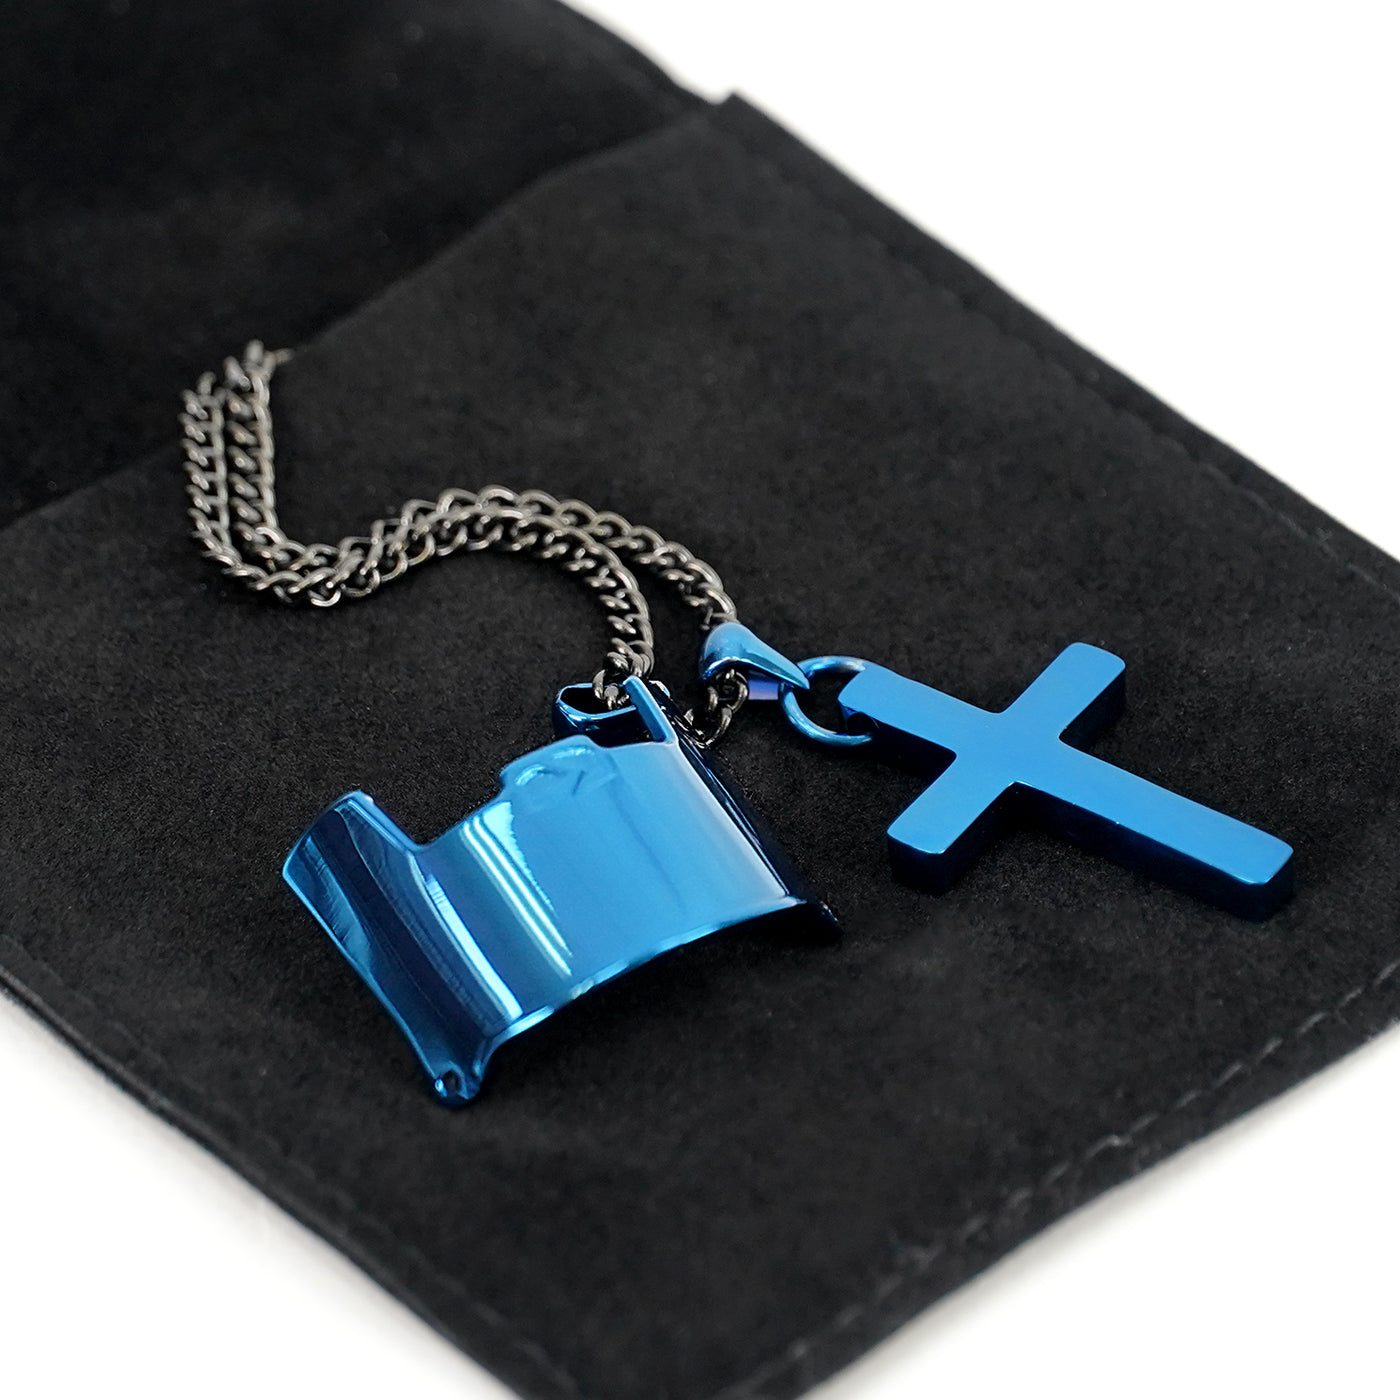 Visor & Cross Pendant with Chain Necklace - Cobalt Blue Stainless Steel